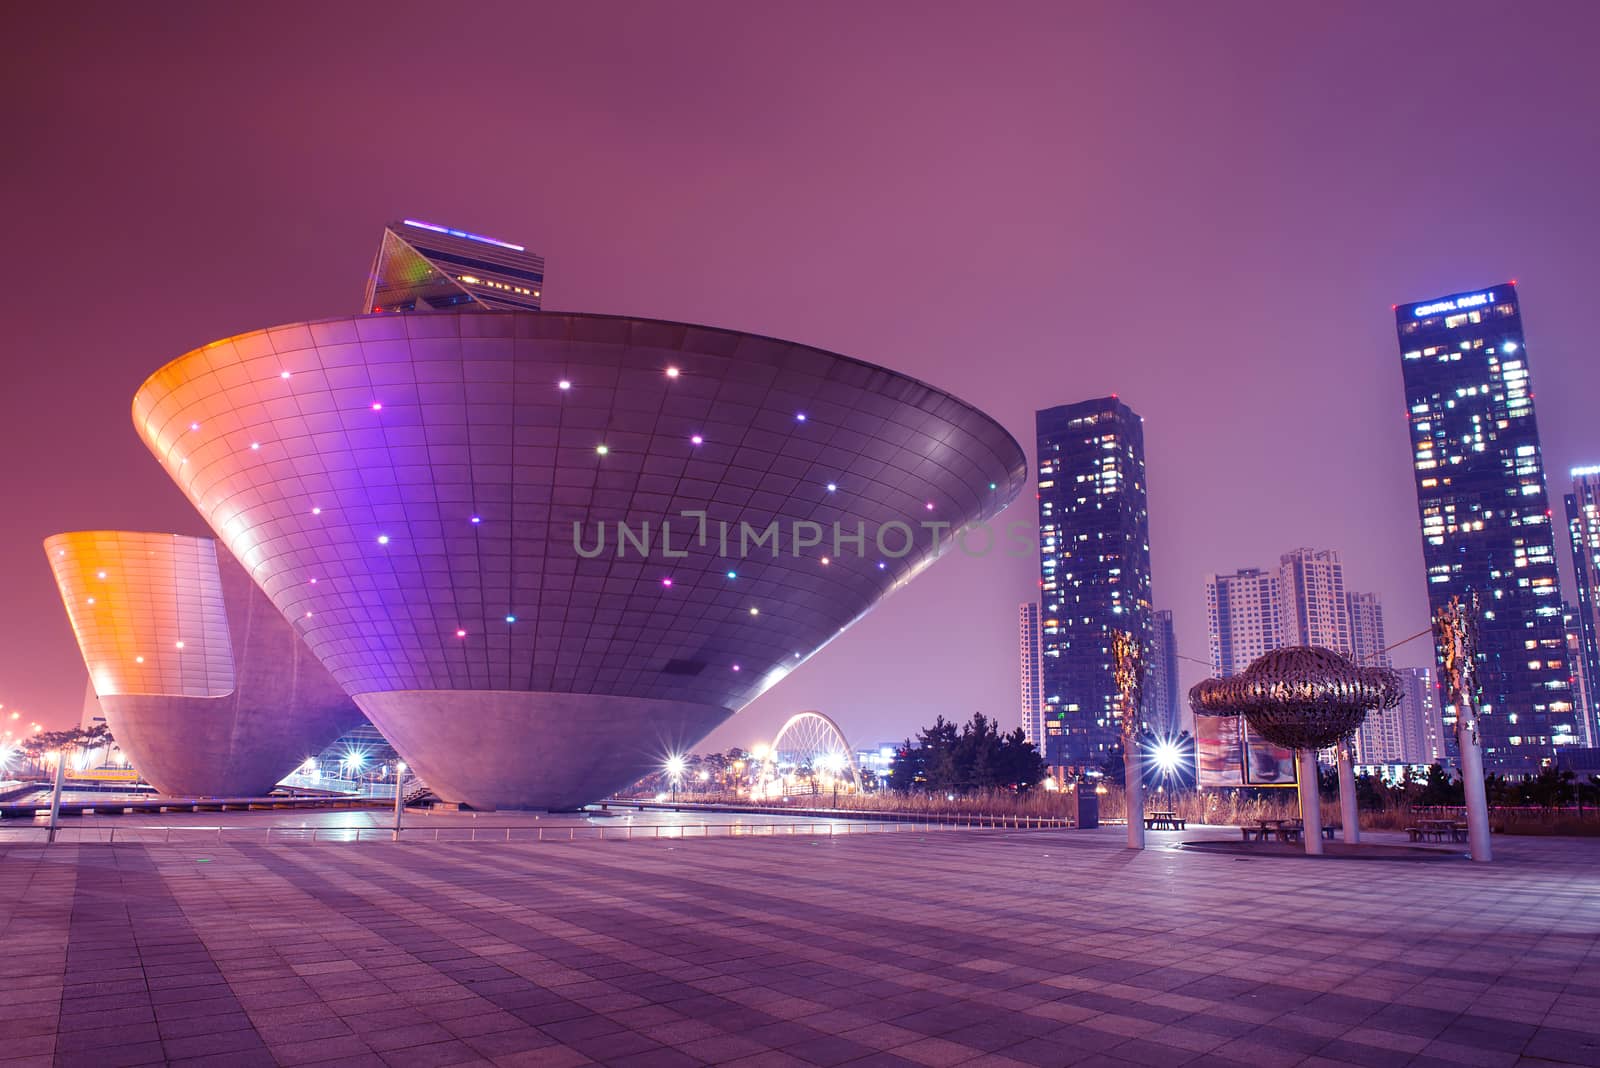 INCHEON, SOUTH KOREA - DEC 27 : Incheon Tri-bowl Building on Dec 27, 2014 in Songdo district, Incheon, South Korea. This architecture is a remarkably shaped exhibition and performance space.